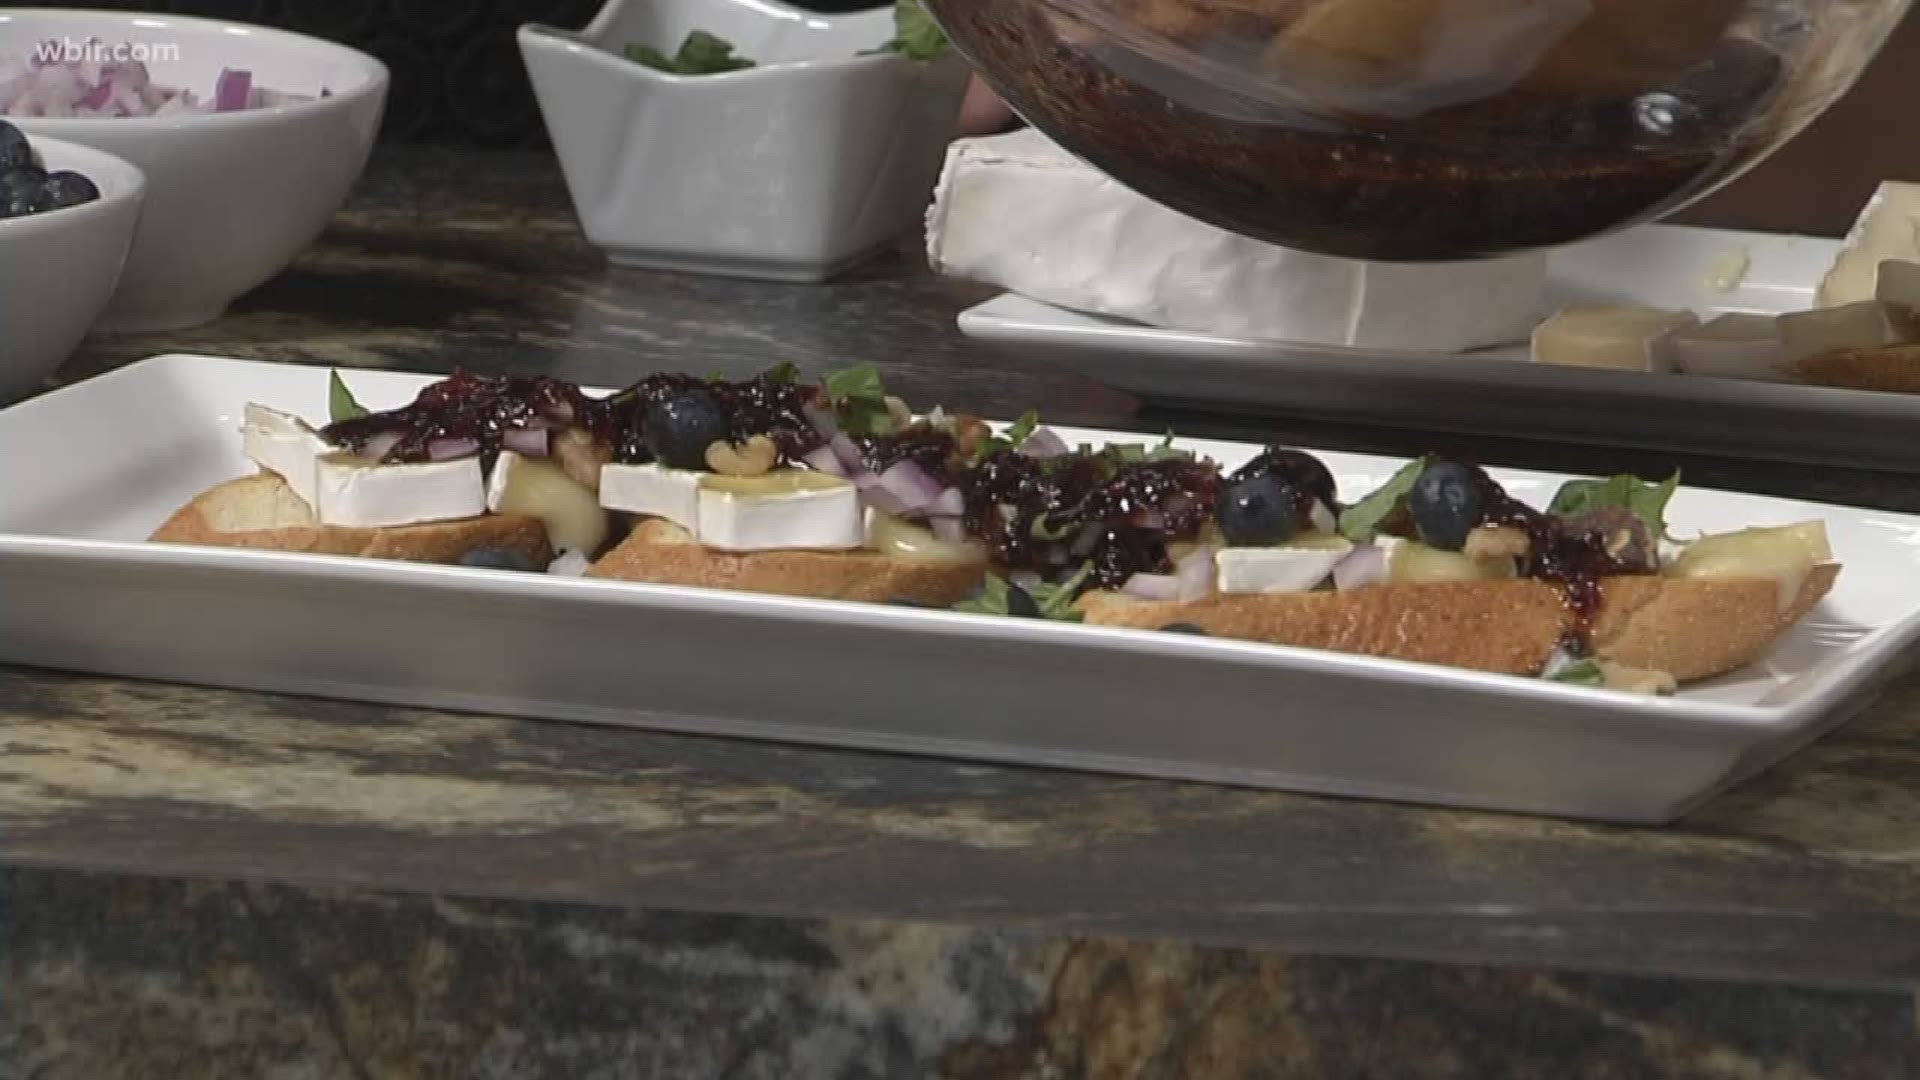 Chef Gary Nicely with Naples Italian Restaurant whipped up a blueberry brie walnut crostini.